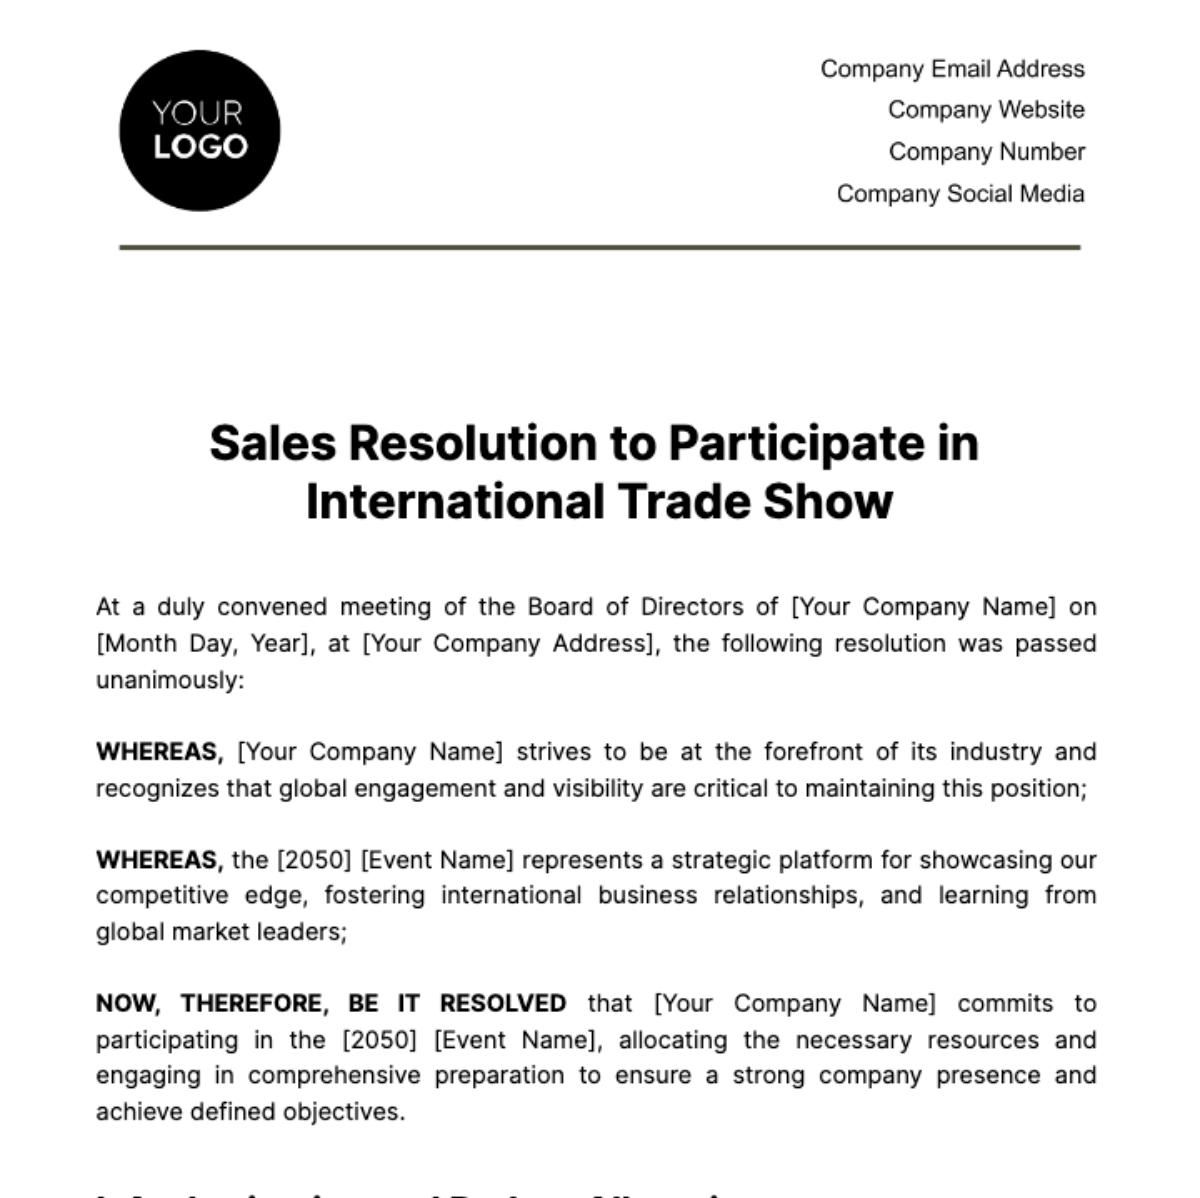 Free Sales Resolution to Participate in International Trade Show Template